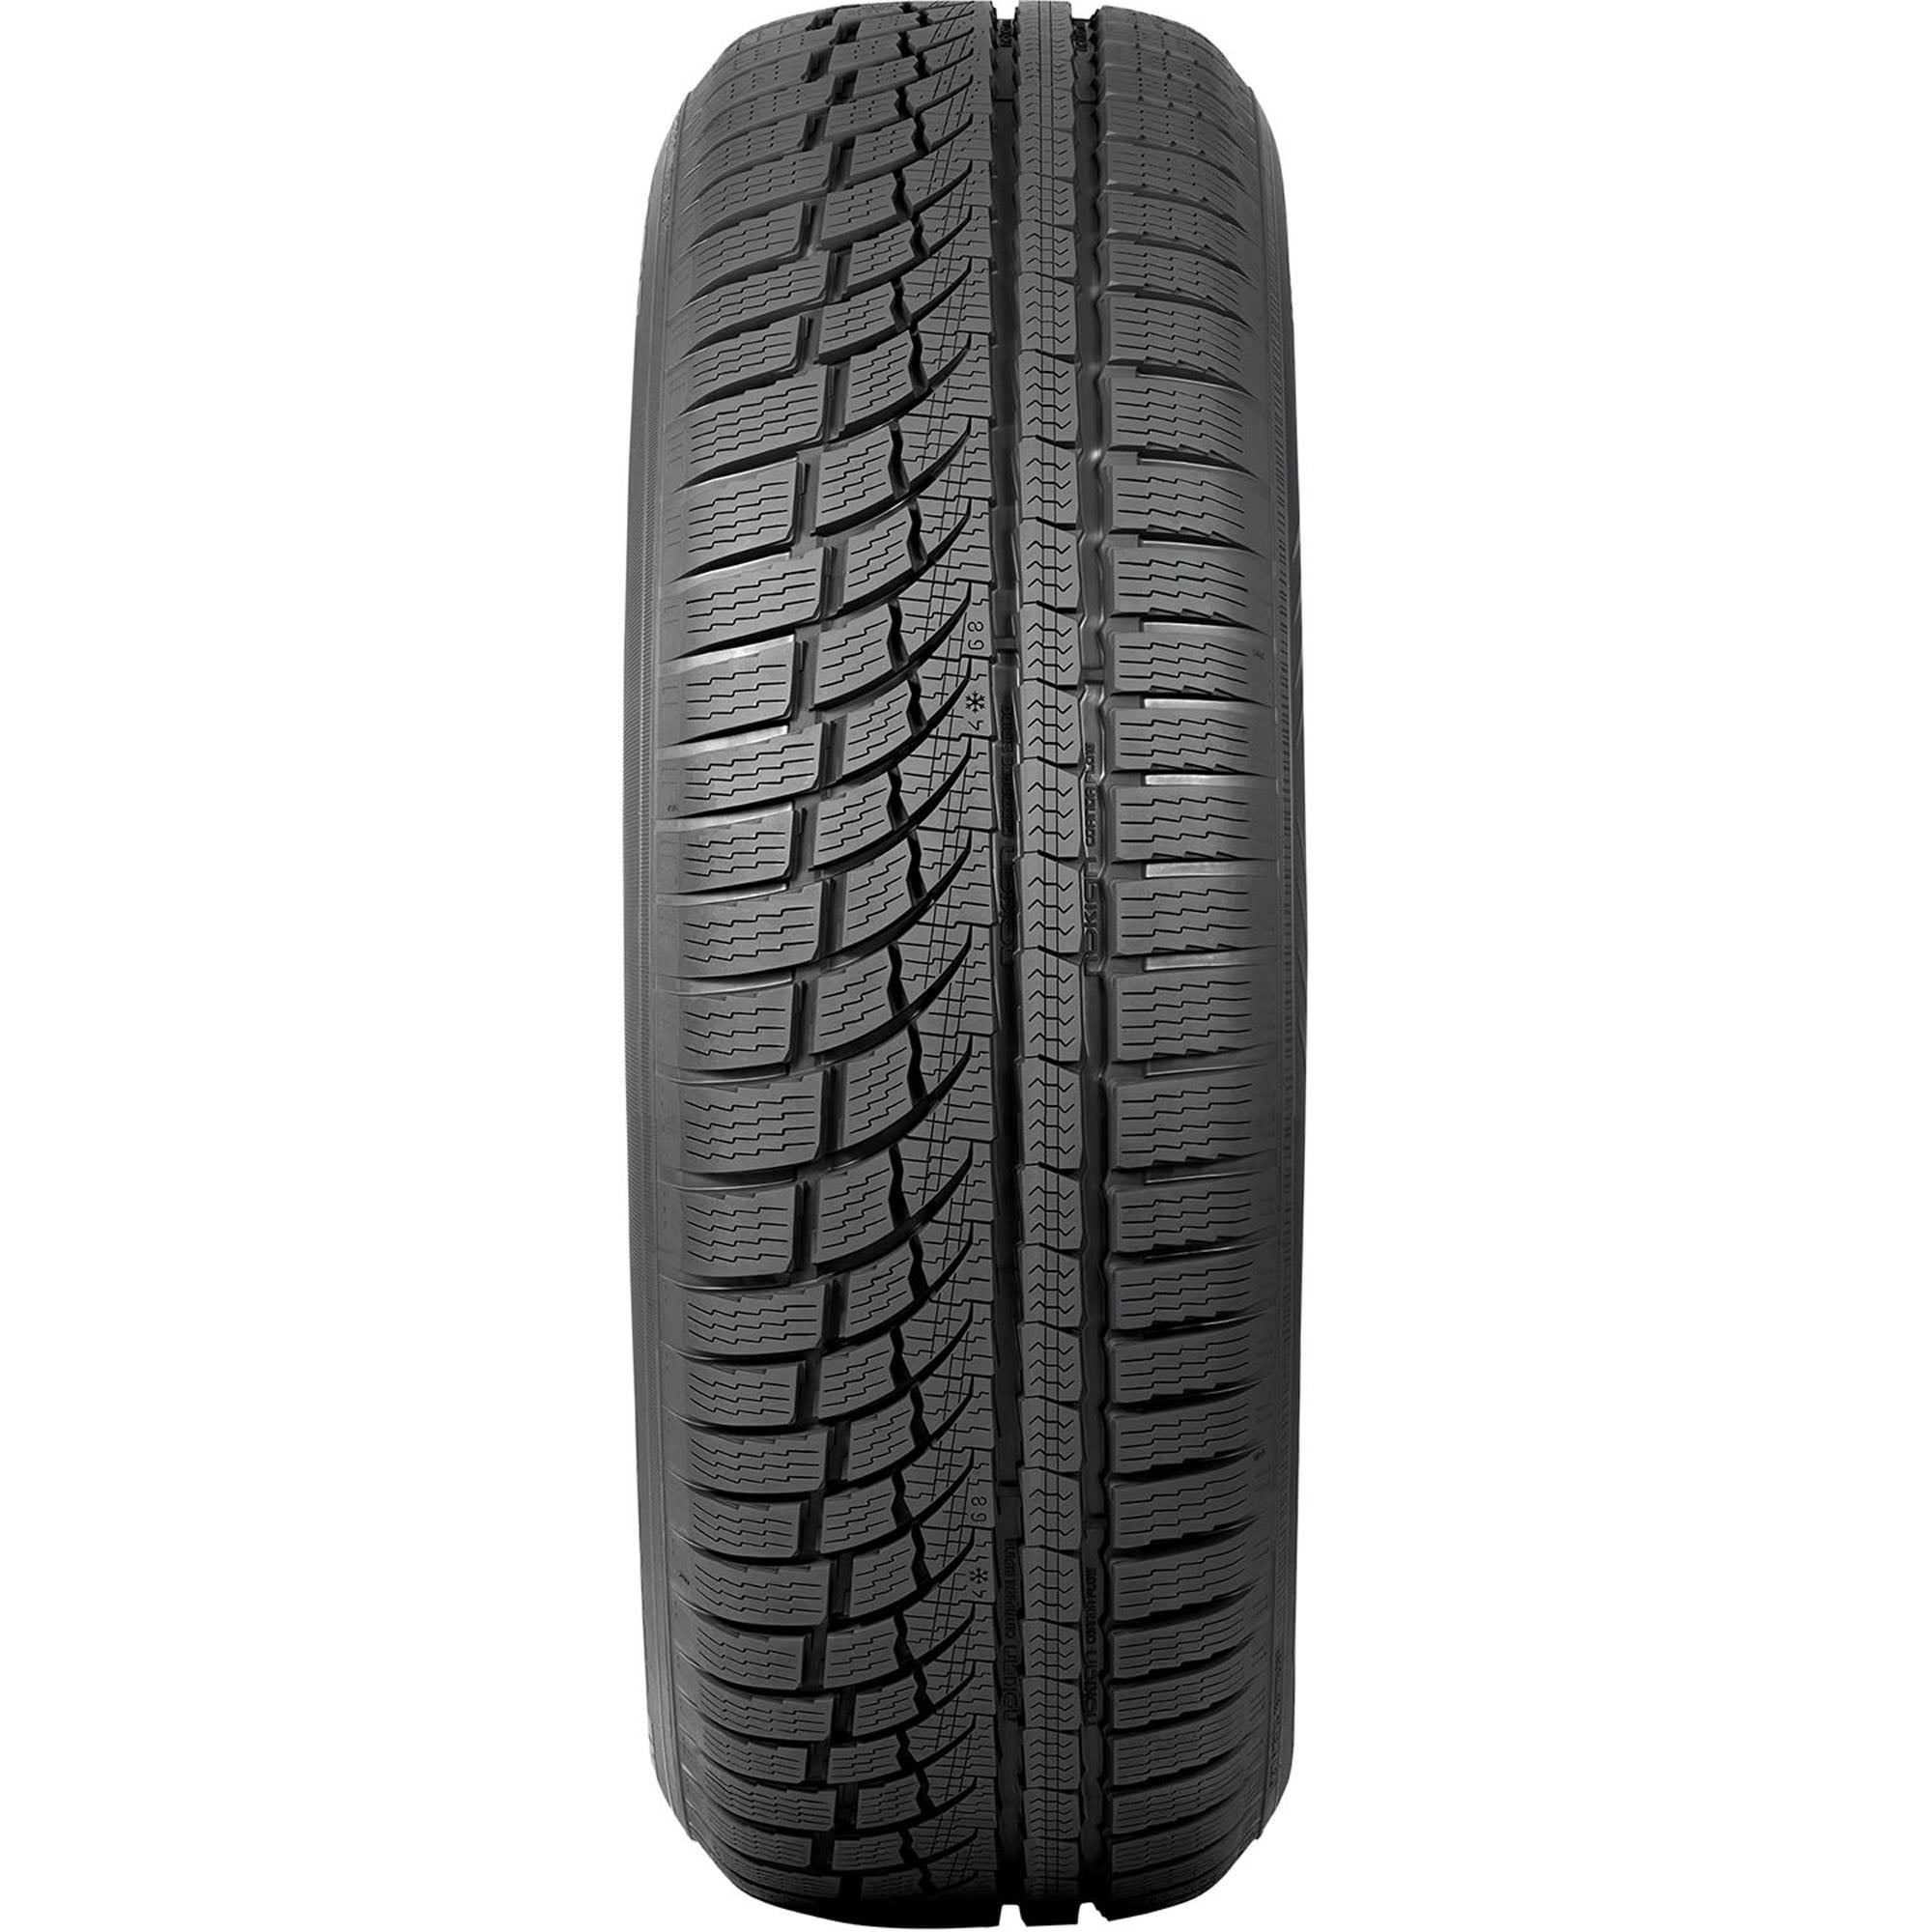 Nokian WR G4 SUV All Weather 255/50R20 109V XL SUV/Crossover Tire